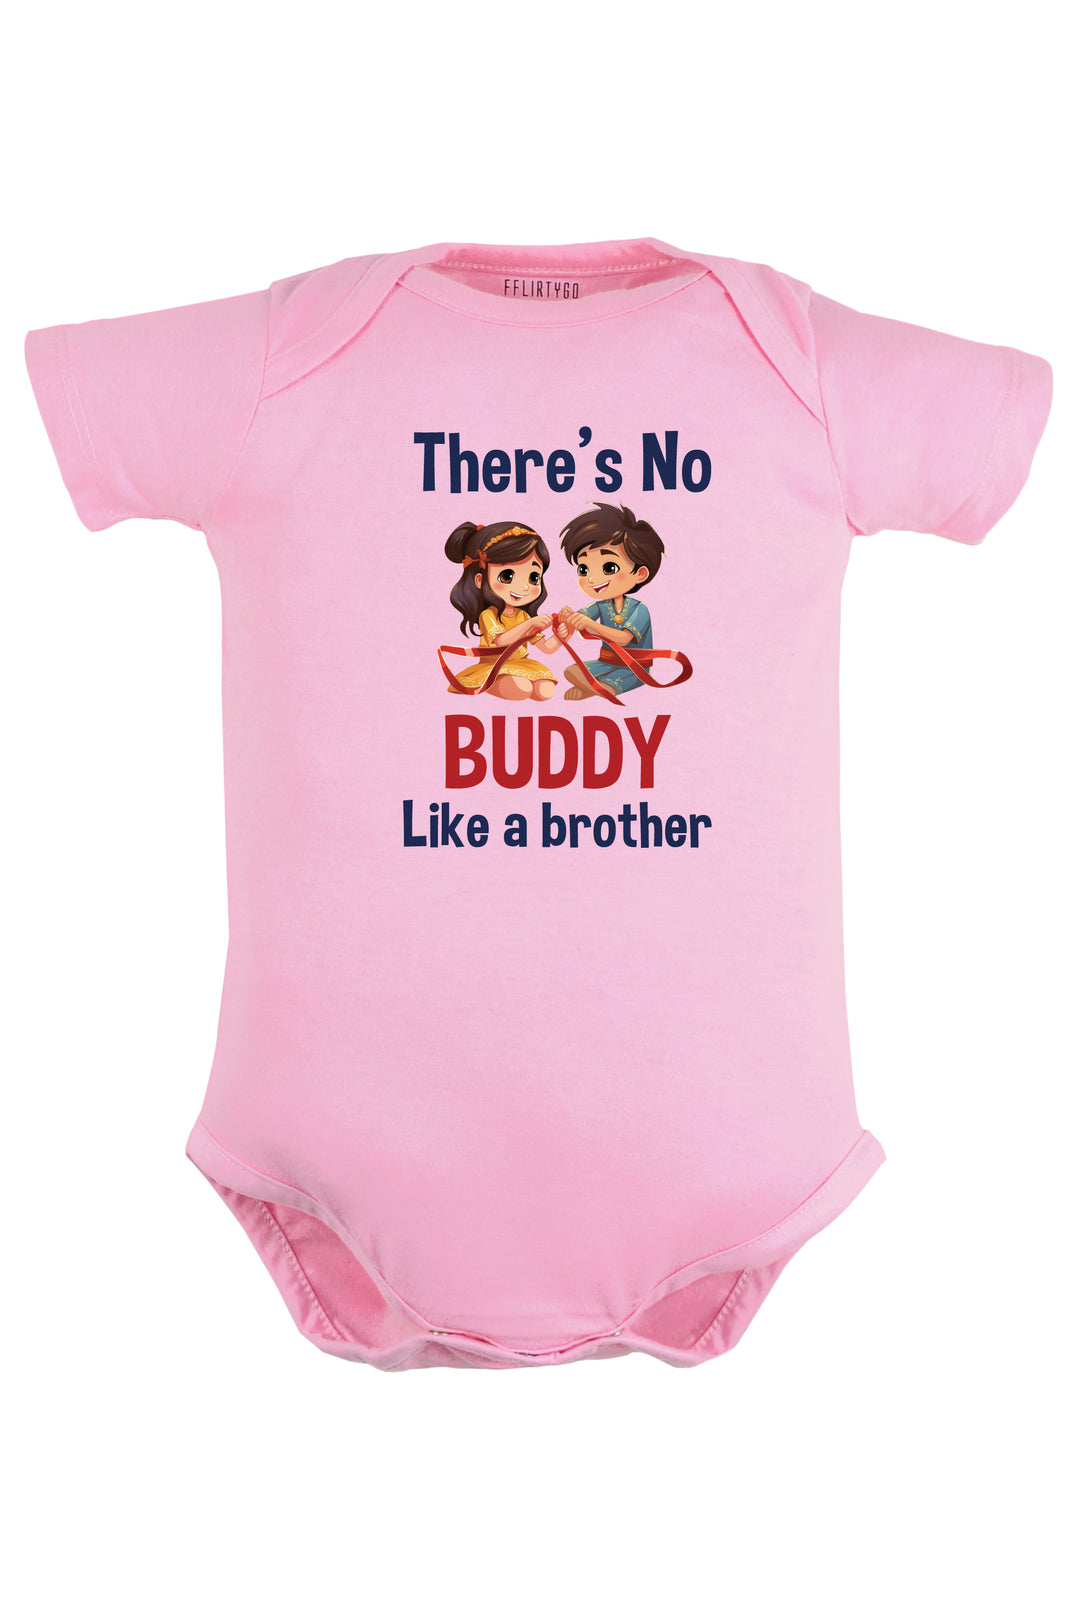 There's No Buddy Like a Brother Baby Romper | Onesies